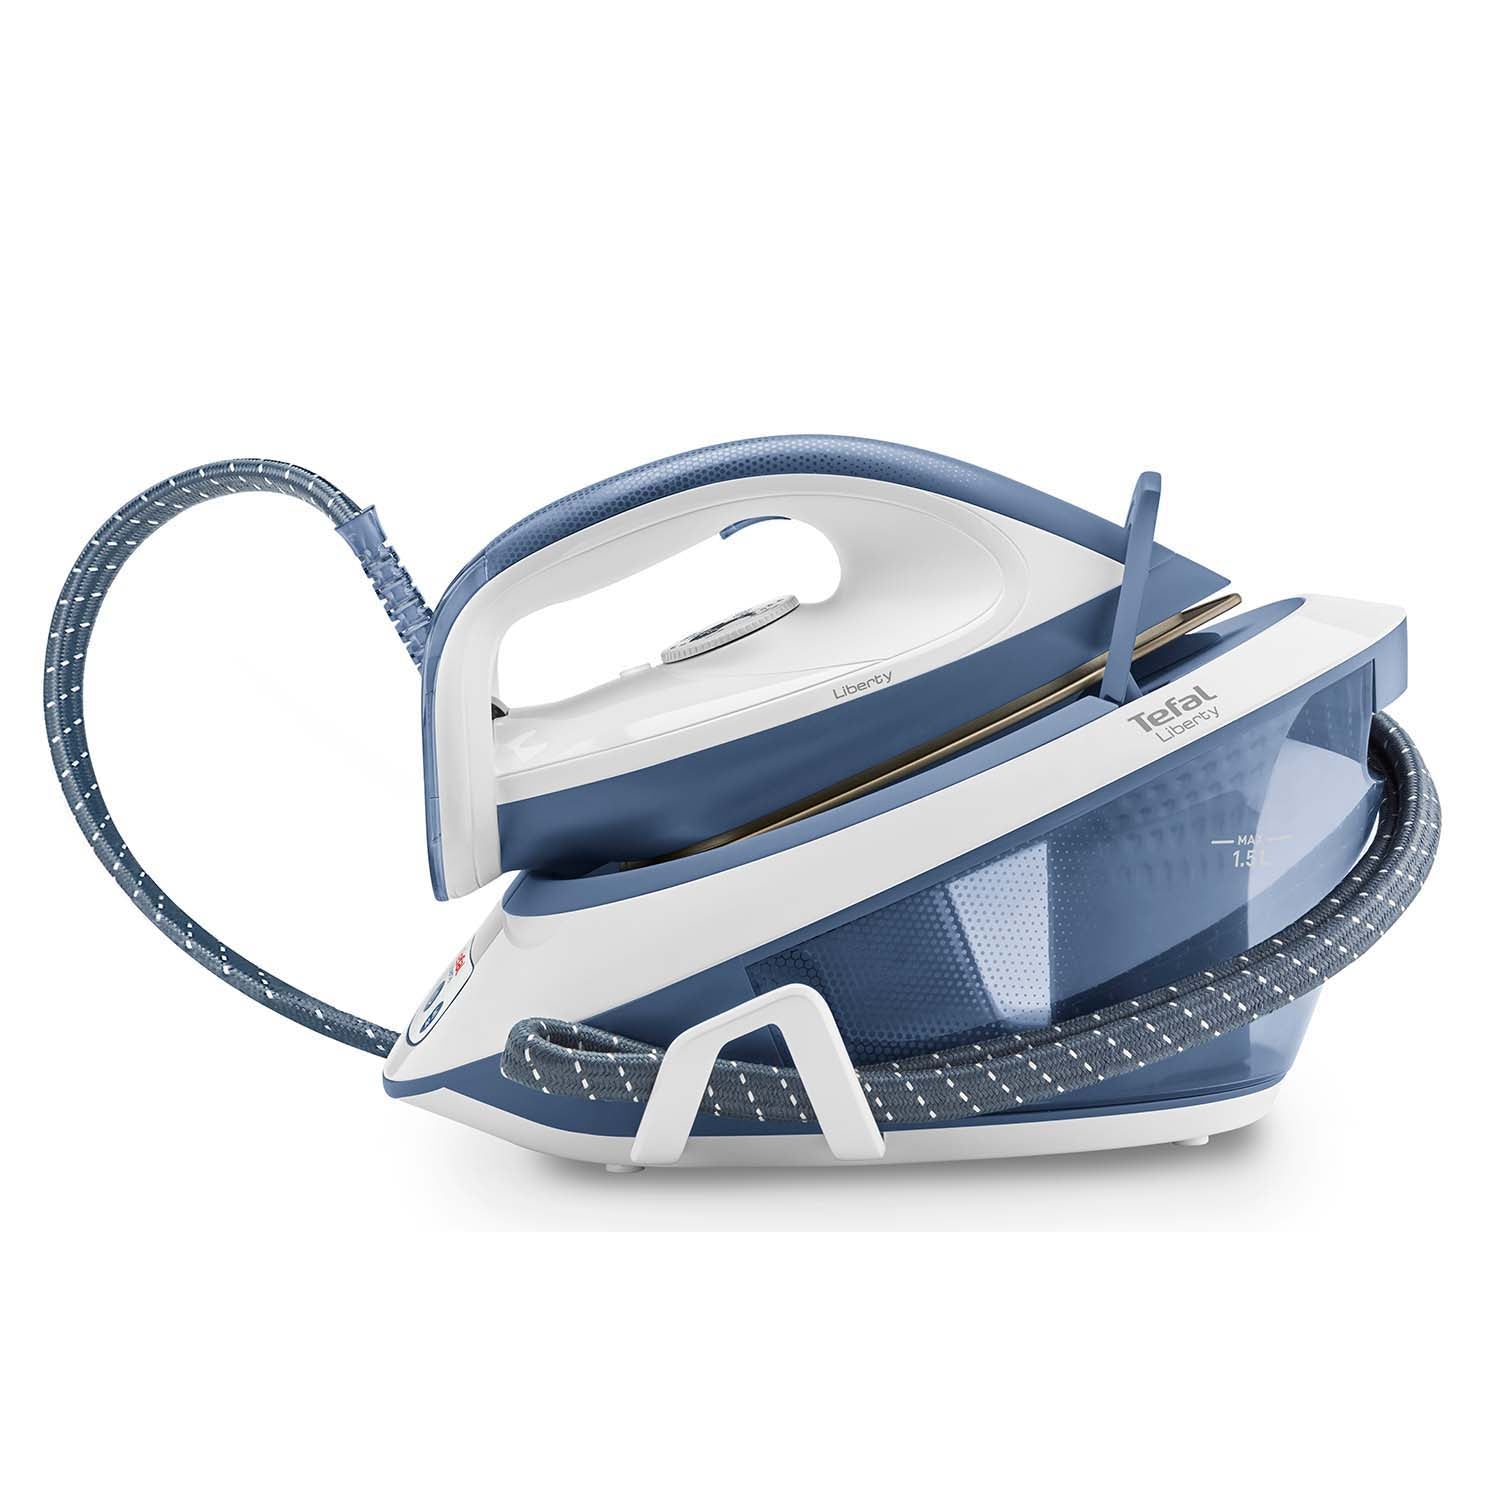 Tefal Steam Generator Iron | SV7020GO 1 Shaws Department Stores